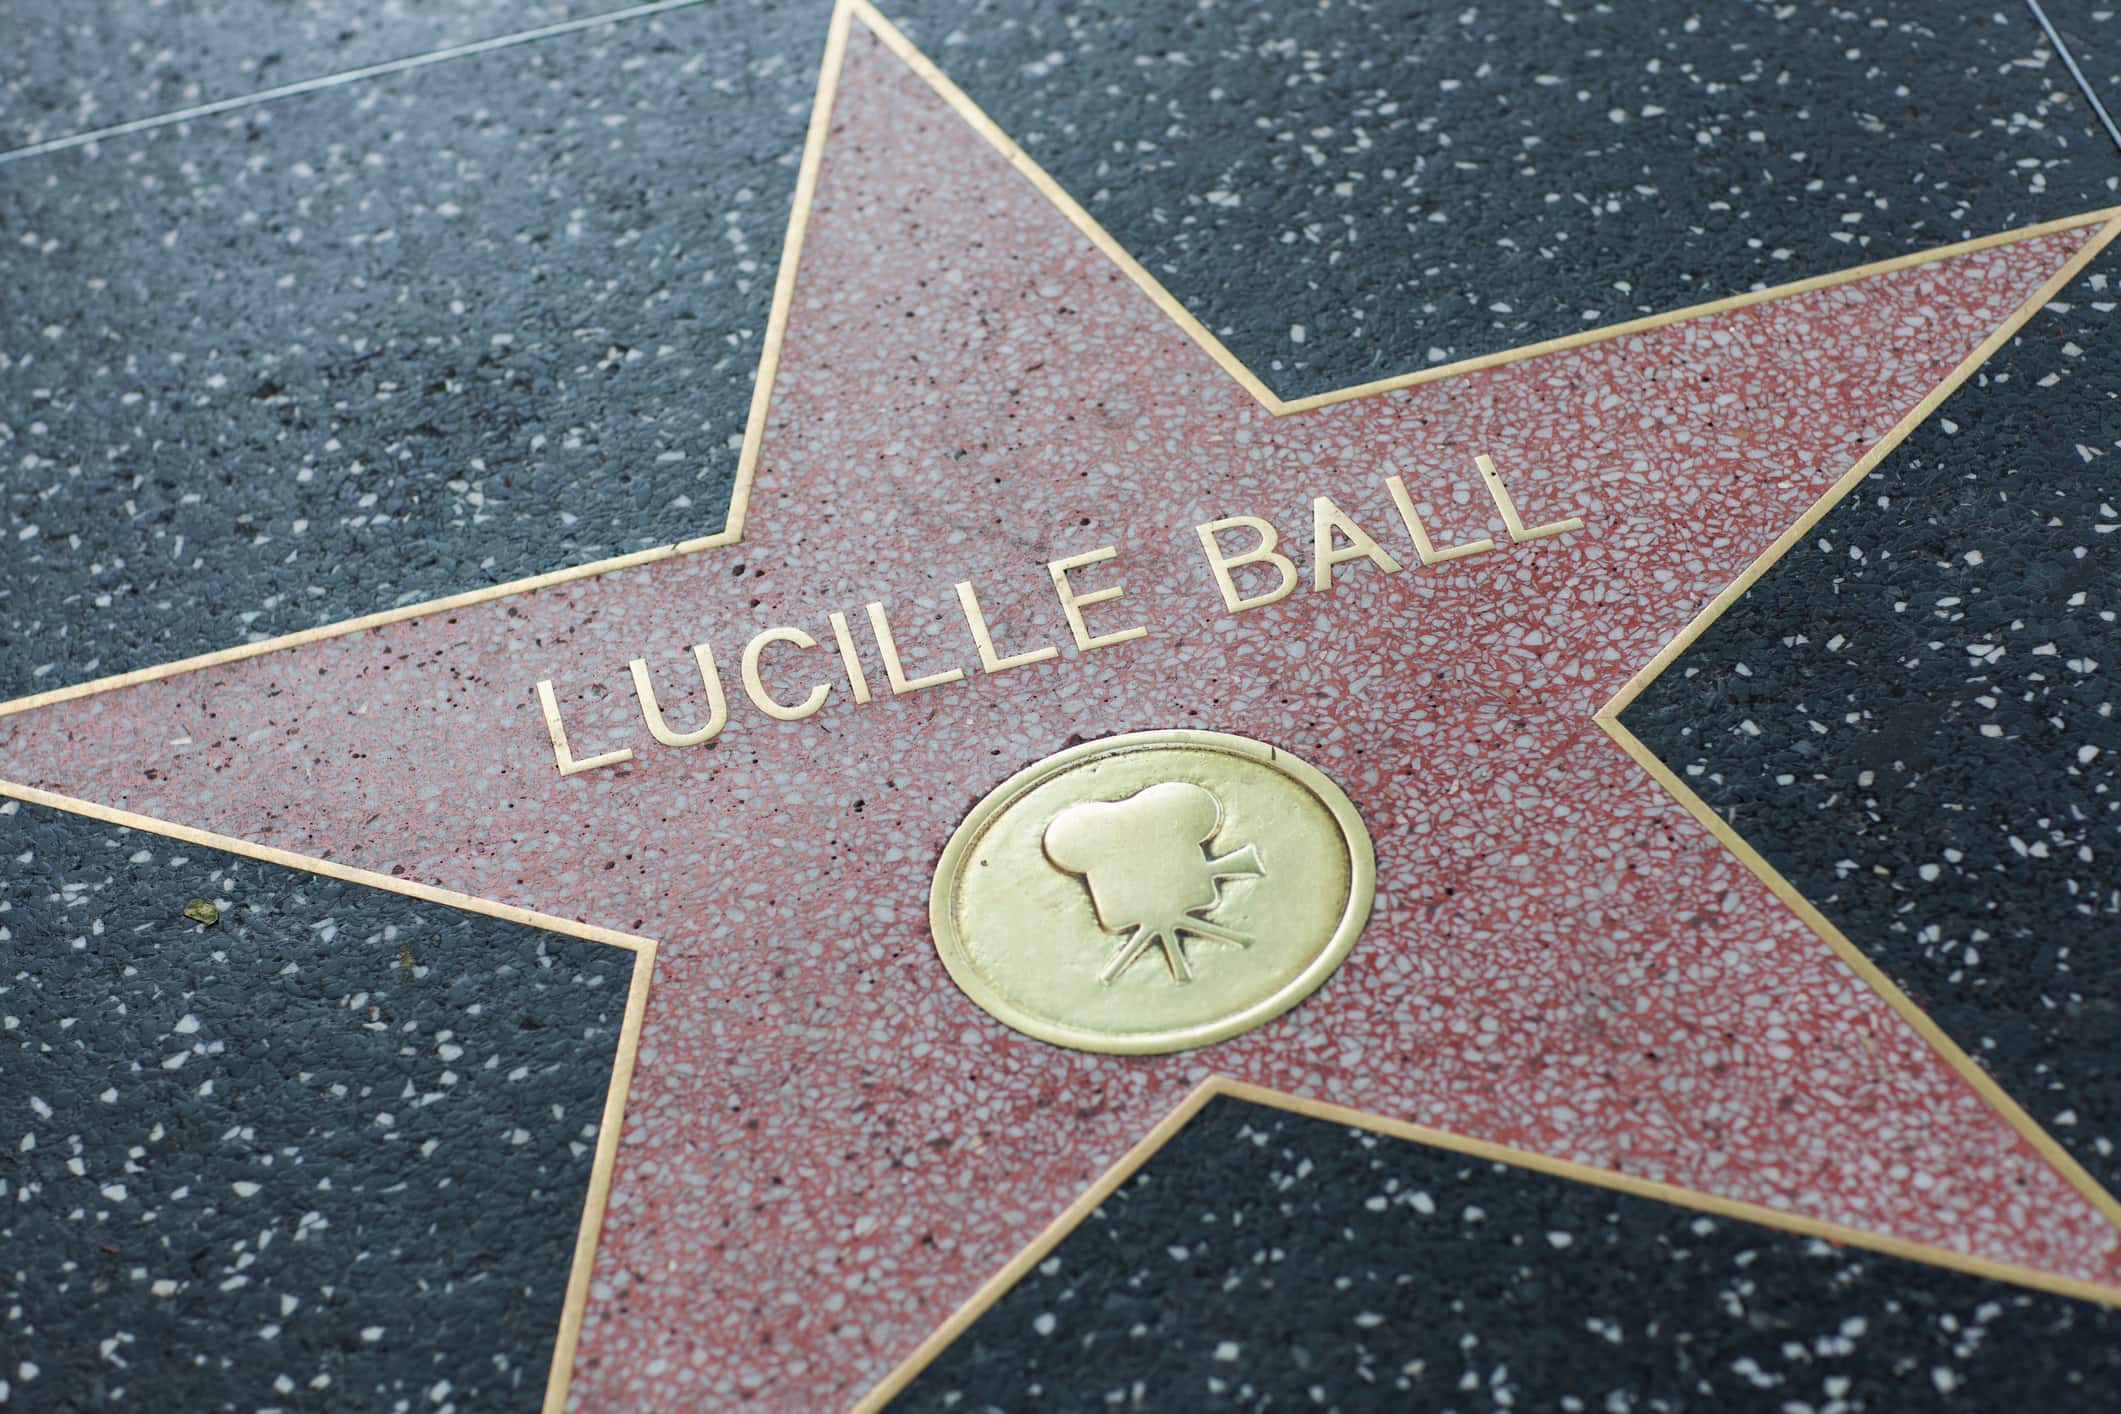 Lucille Ball memorial on the famous Hollywood Walk of Fame in Los Angeles, CA, USA.